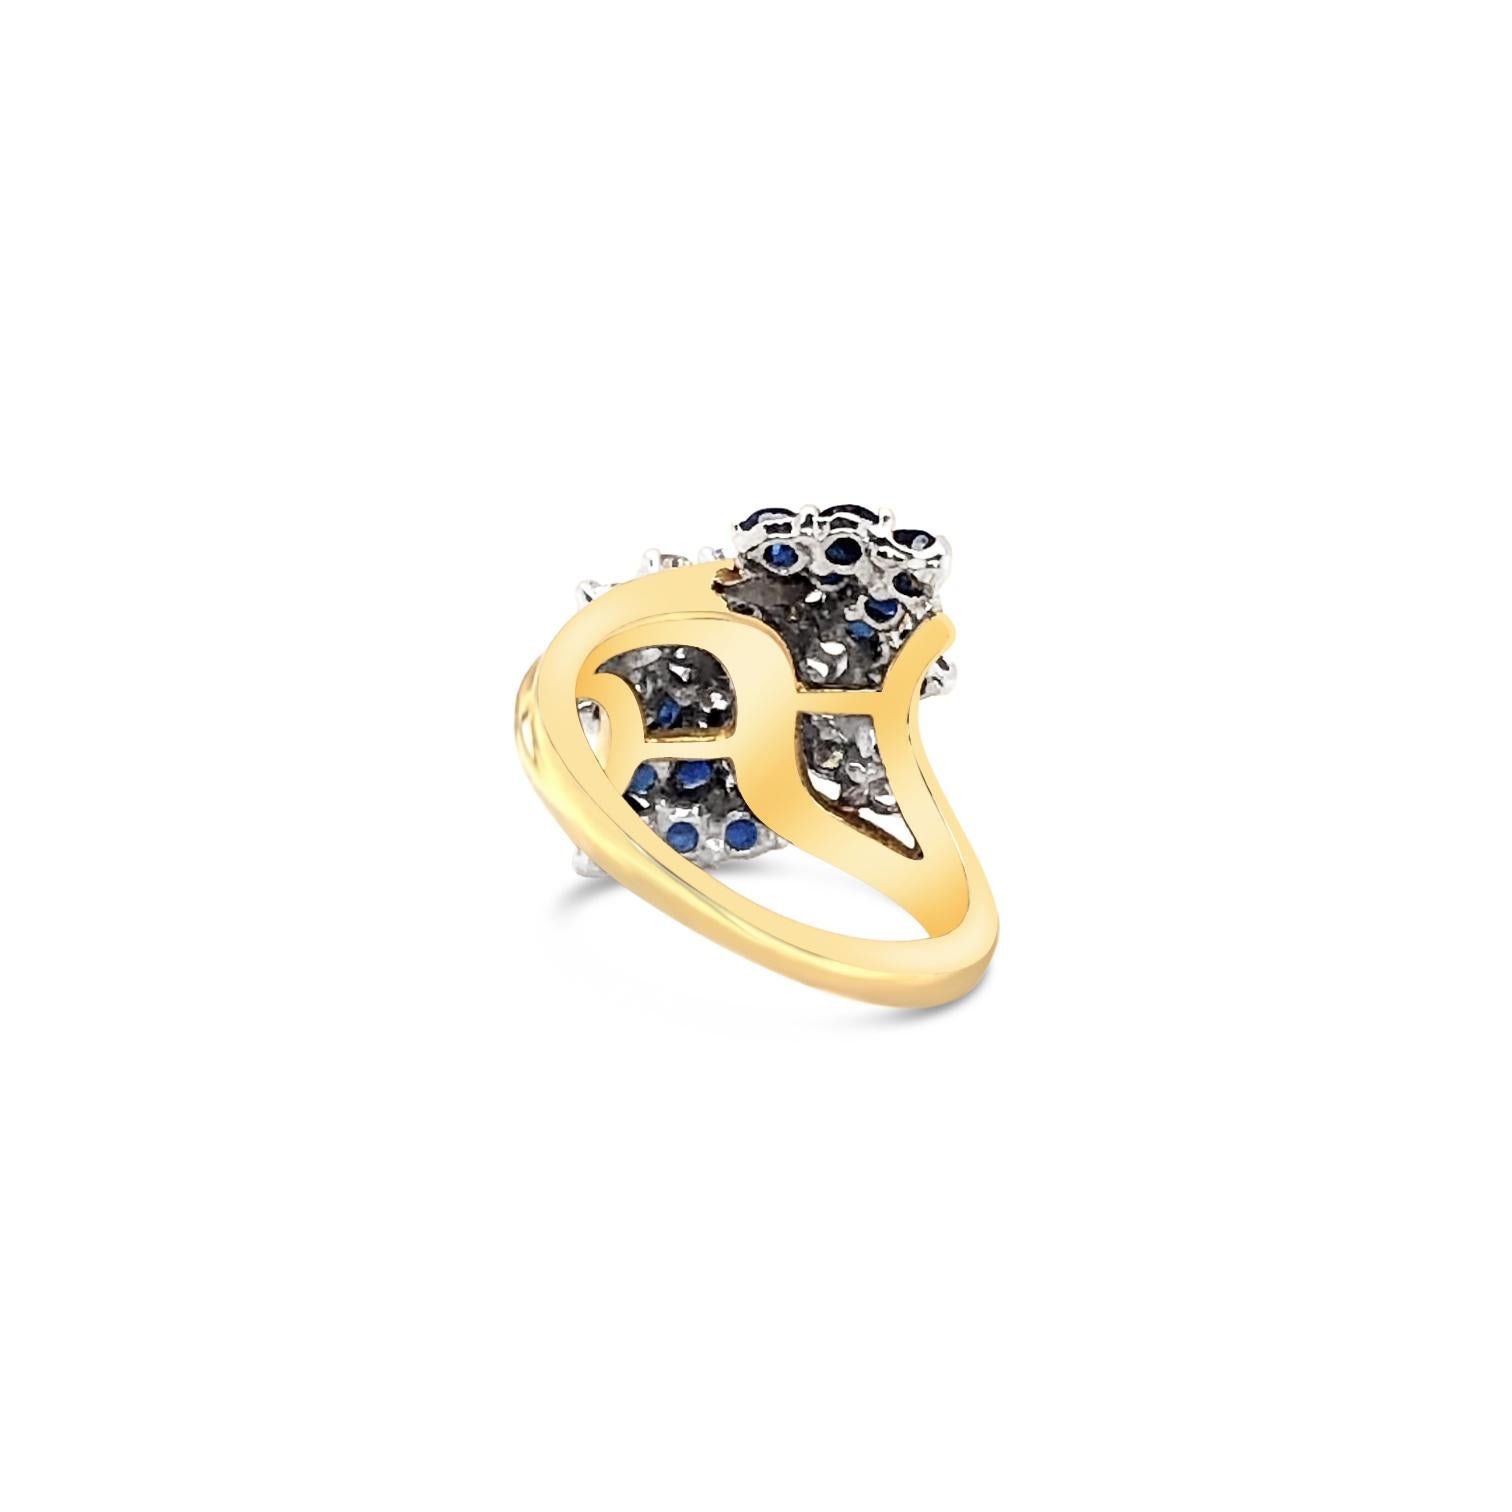 1.96 Carat 'total weight' Sapphire and Diamond Cluster Ring in 18 Karat Gold In Excellent Condition For Sale In Palm Beach, FL